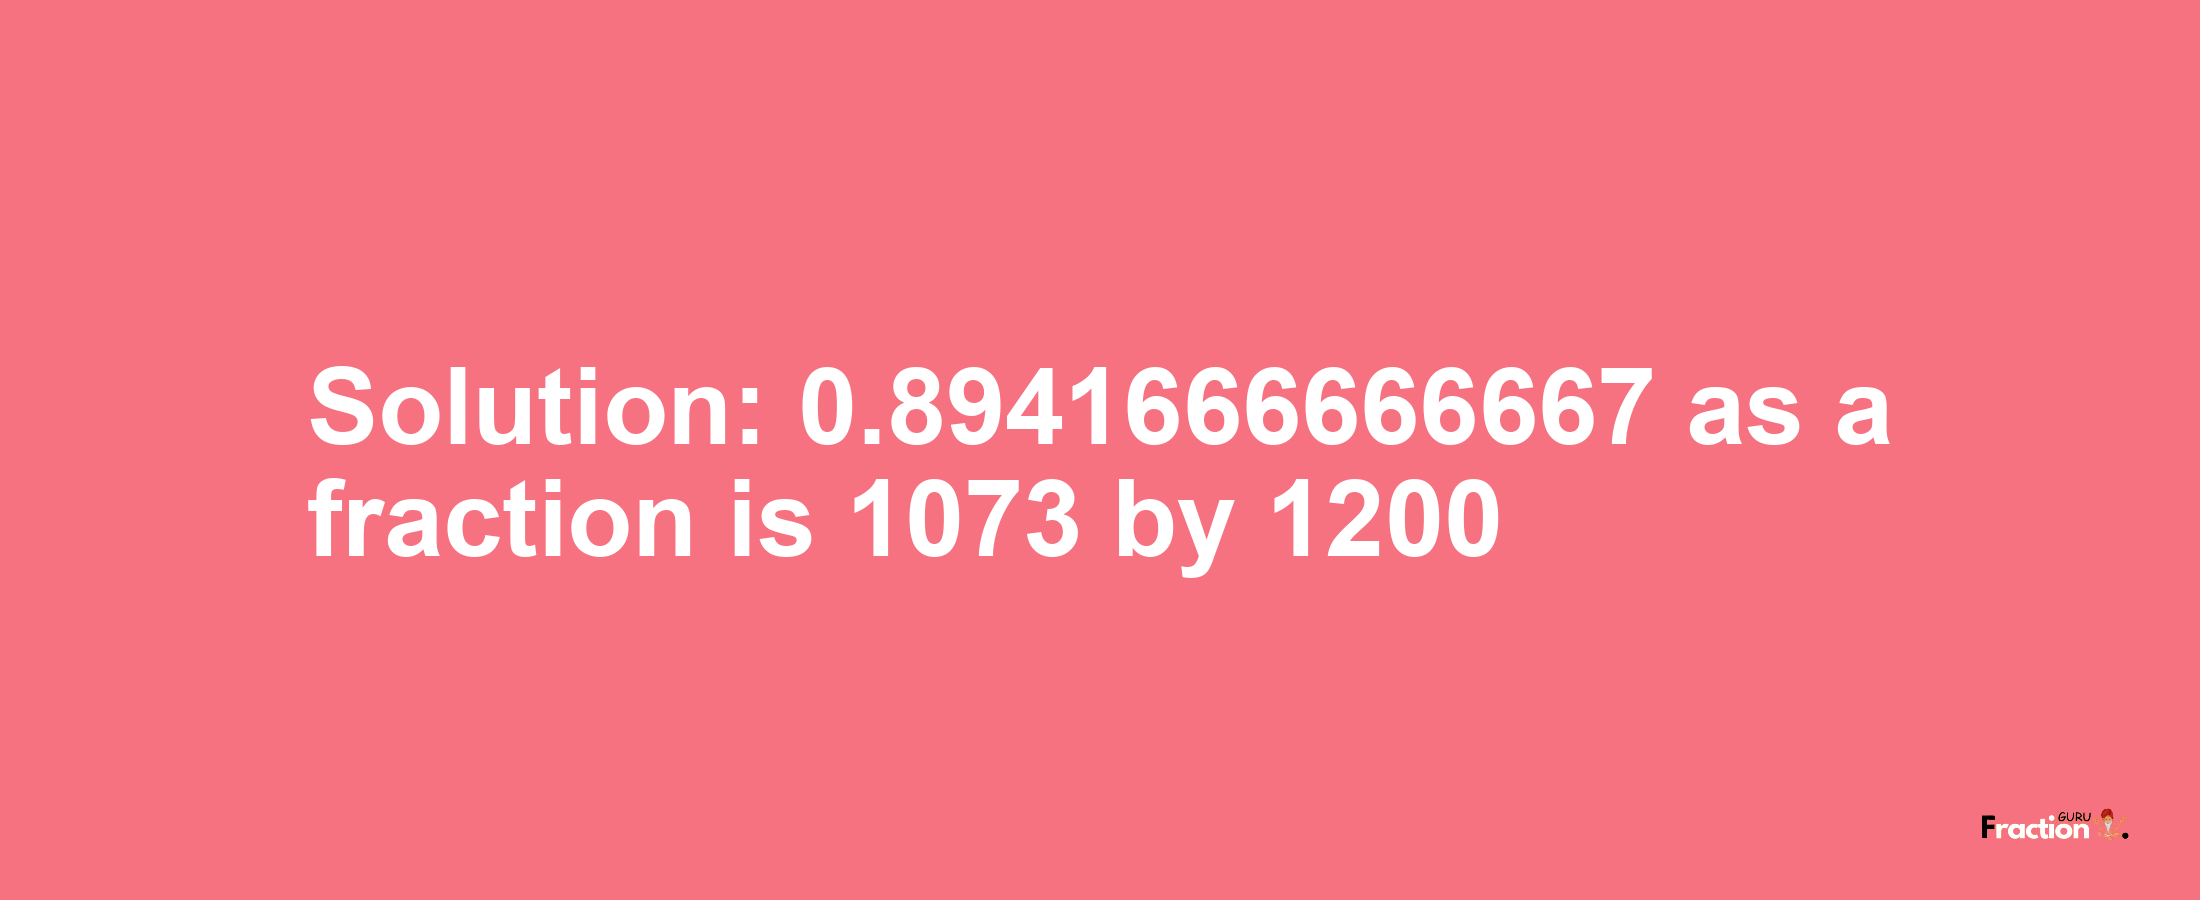 Solution:0.8941666666667 as a fraction is 1073/1200